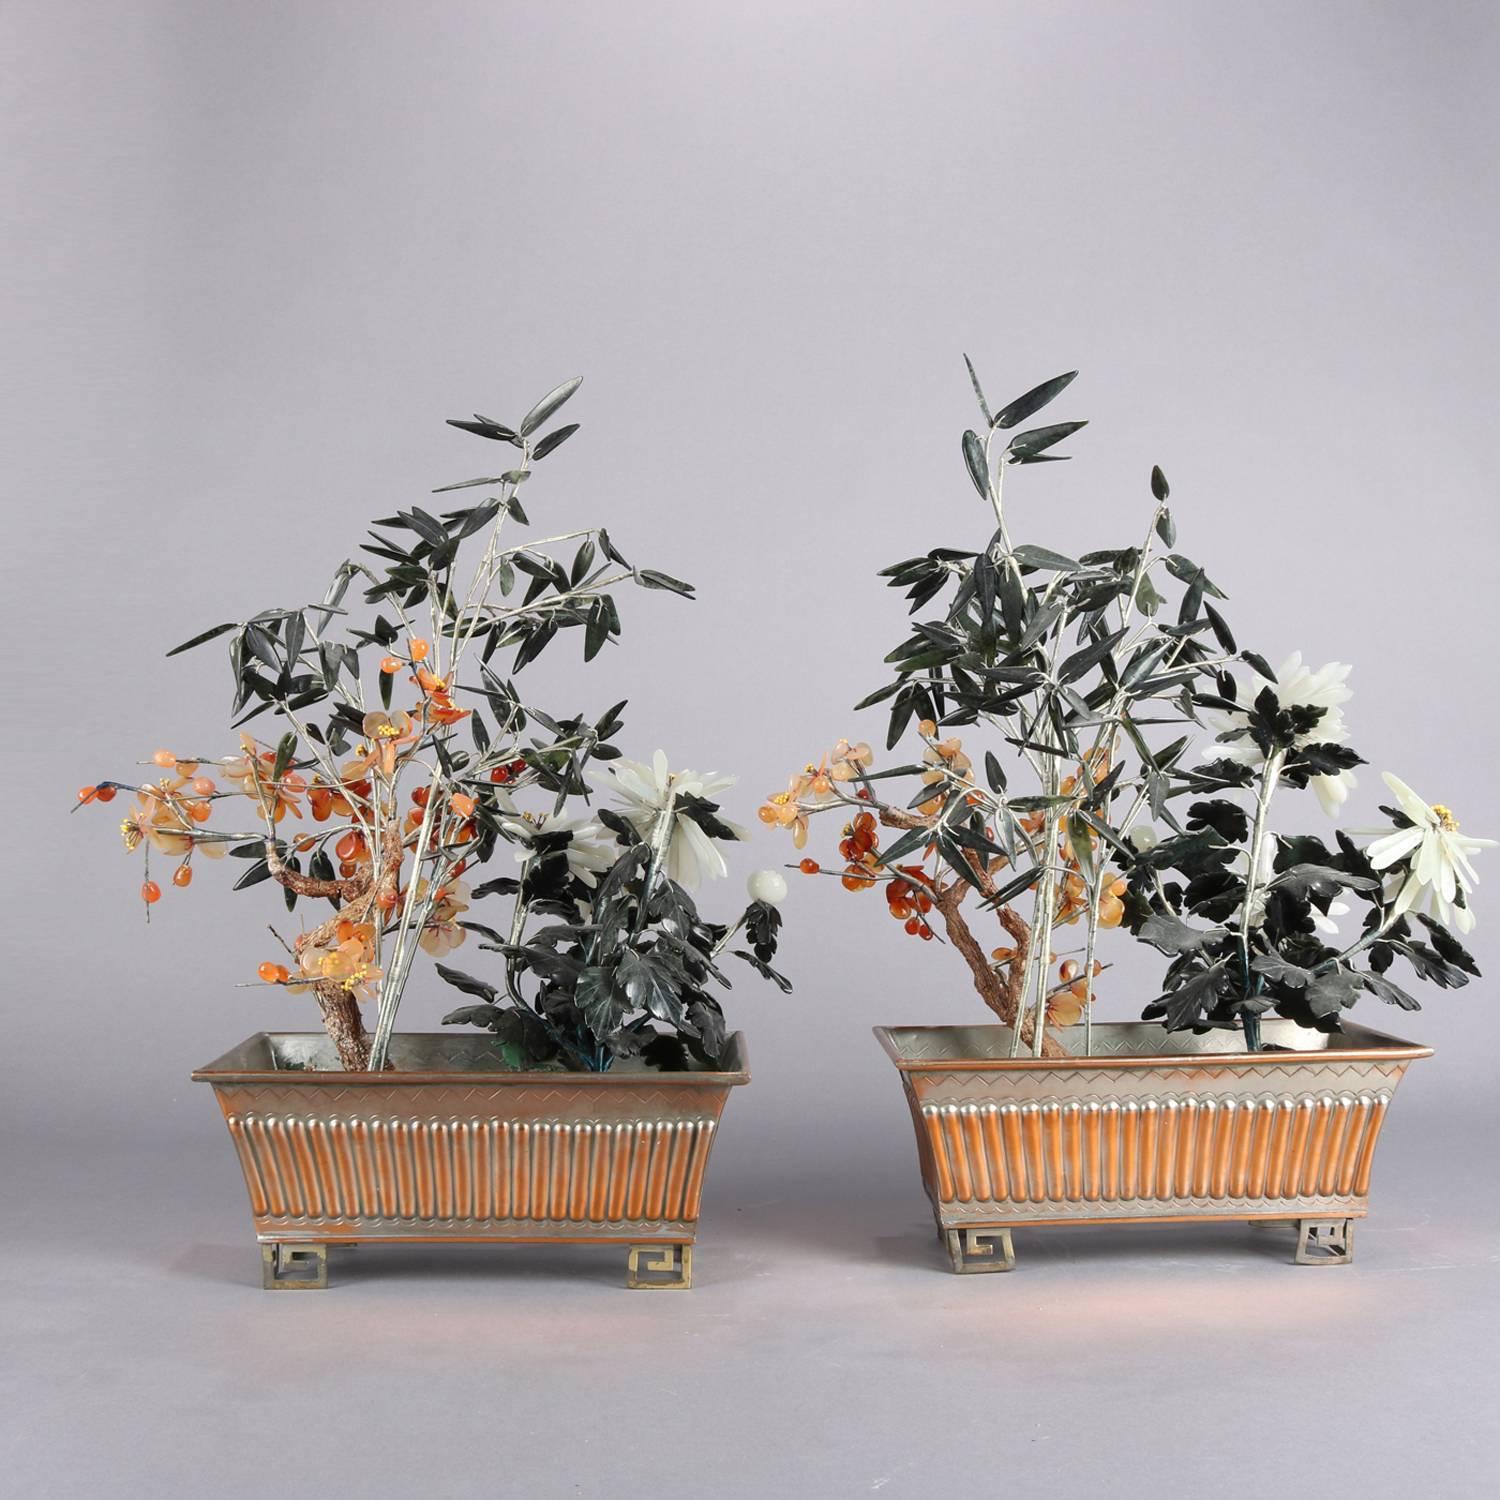 Pair of Chinese jade Bonsai trees feature floral and bamboo in ribbed metal pots seated on Greek key feet, 20th century

Measure: 18